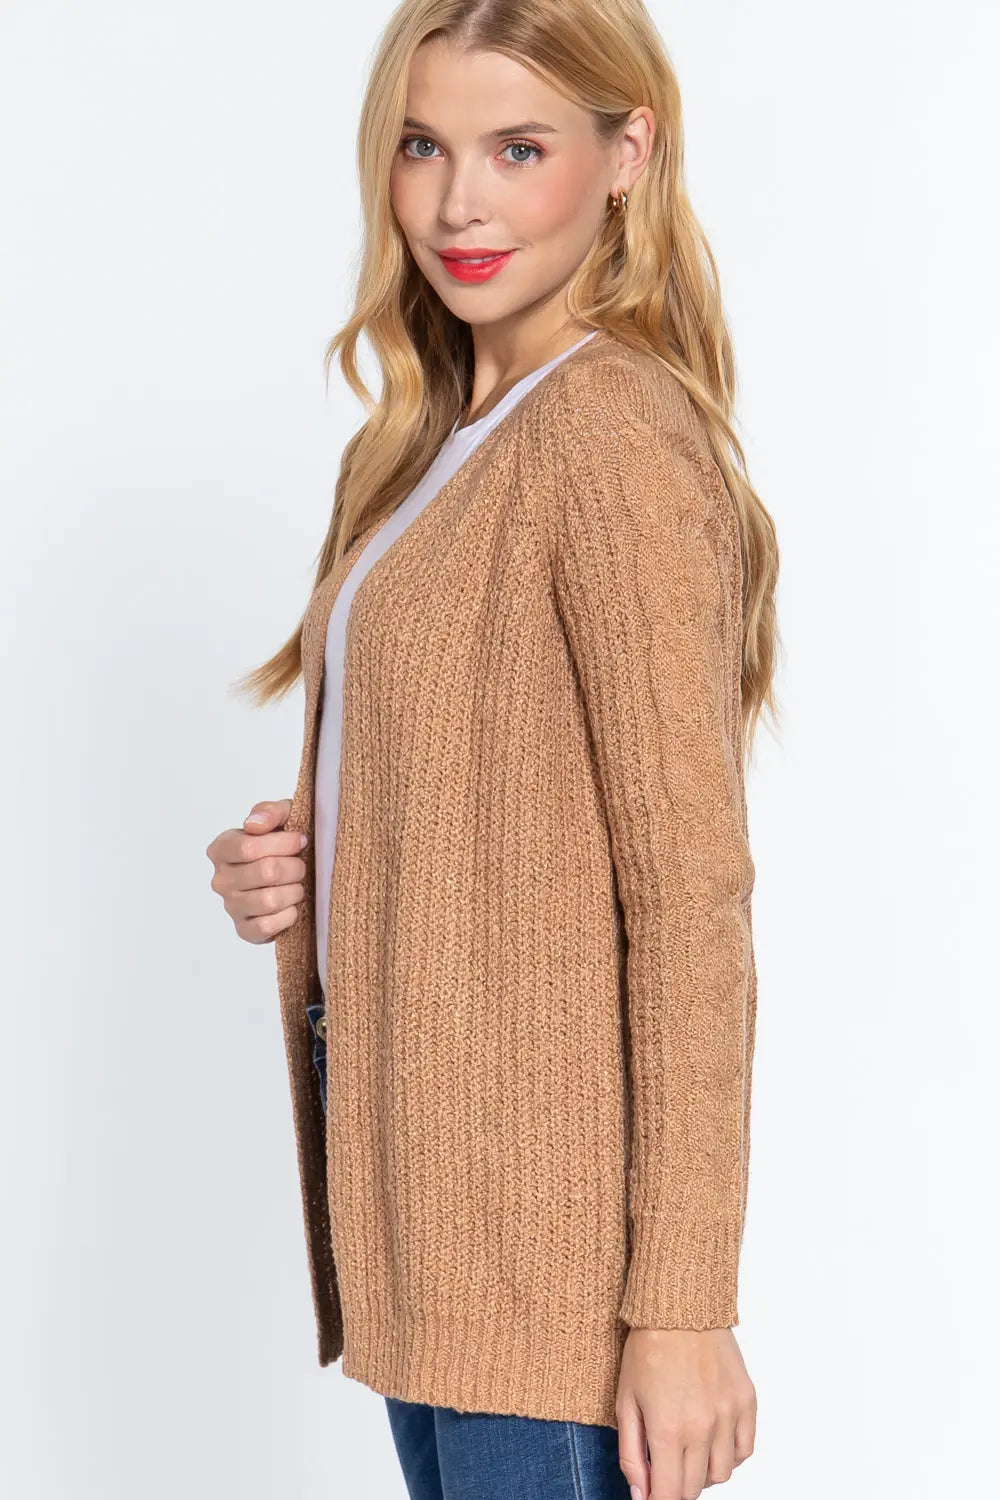 Long Slv Open Front Sweater Cardigan Sunny EvE Fashion